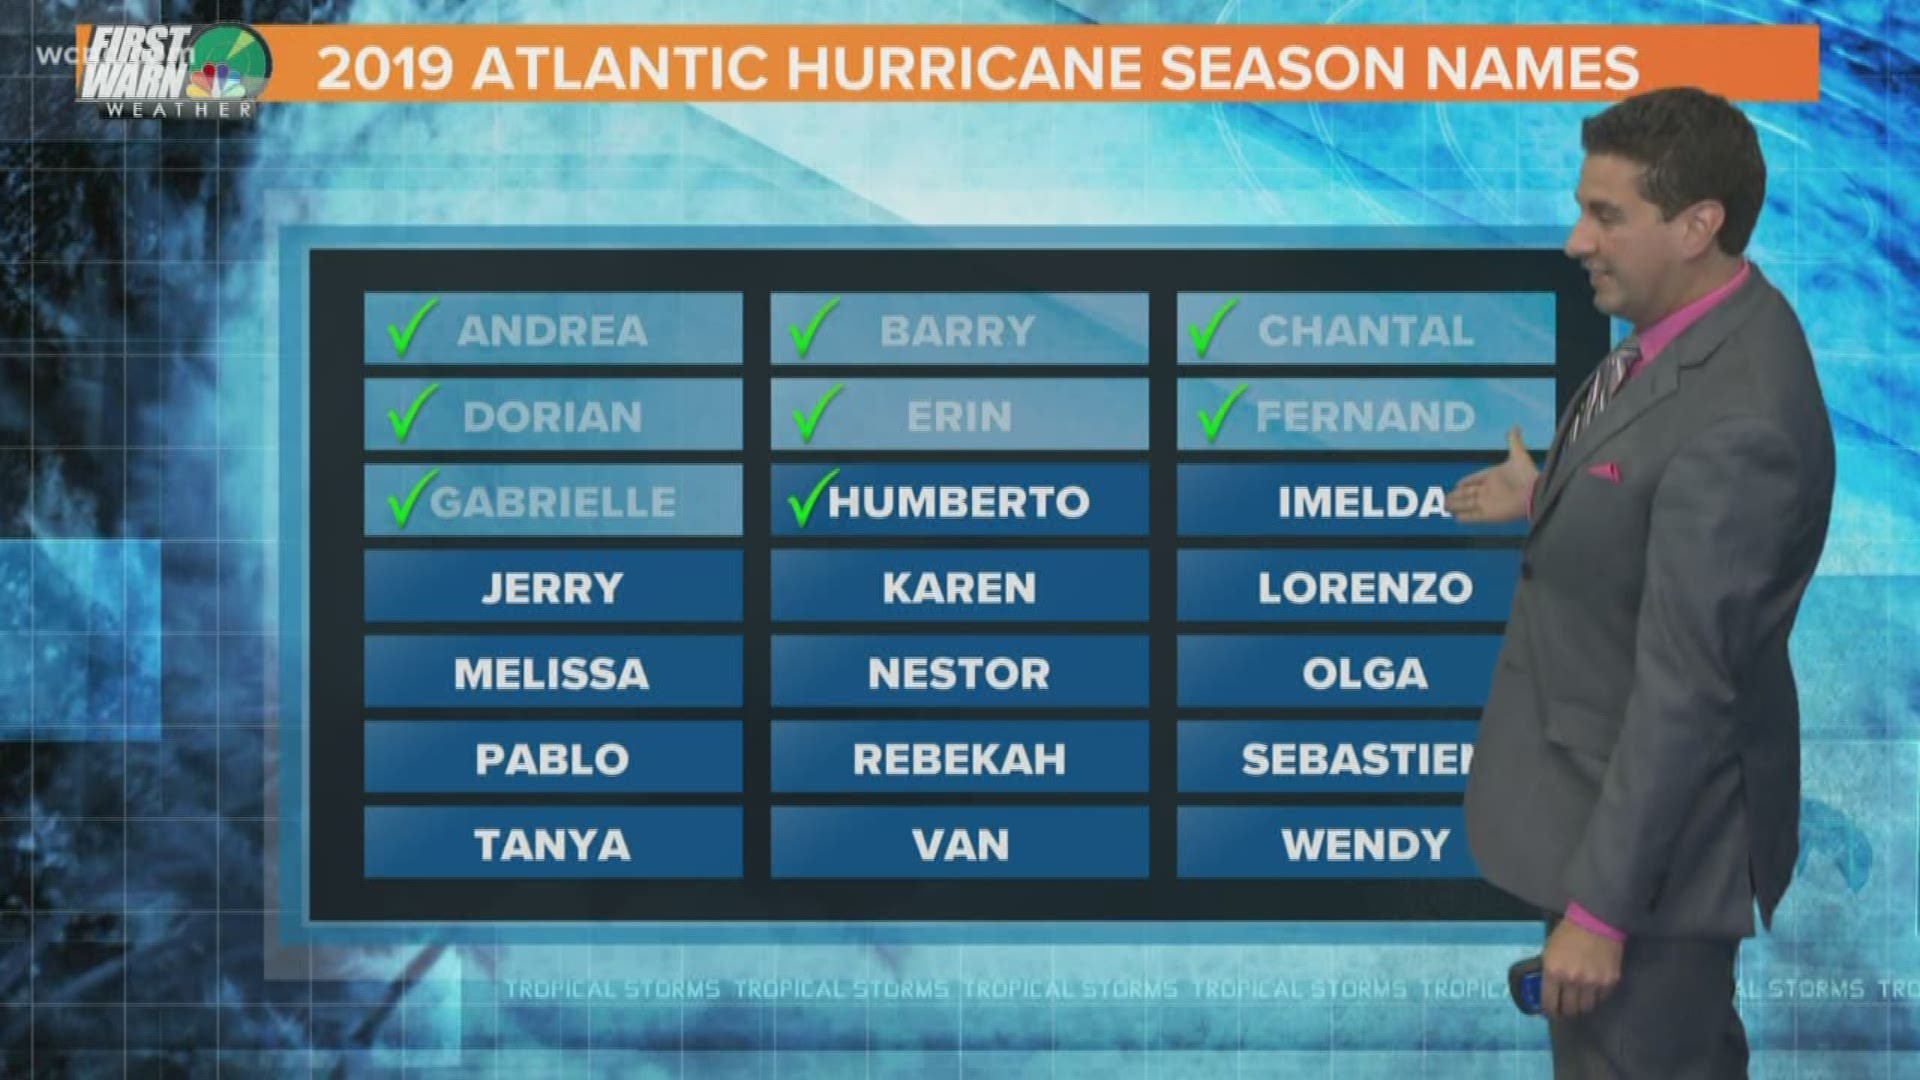 When a tropical cyclone is destructive, its name gets retired from future use. First Warn Meteorologist Chis Mulchay looks at what letter of the alphabet has had the most names retired.